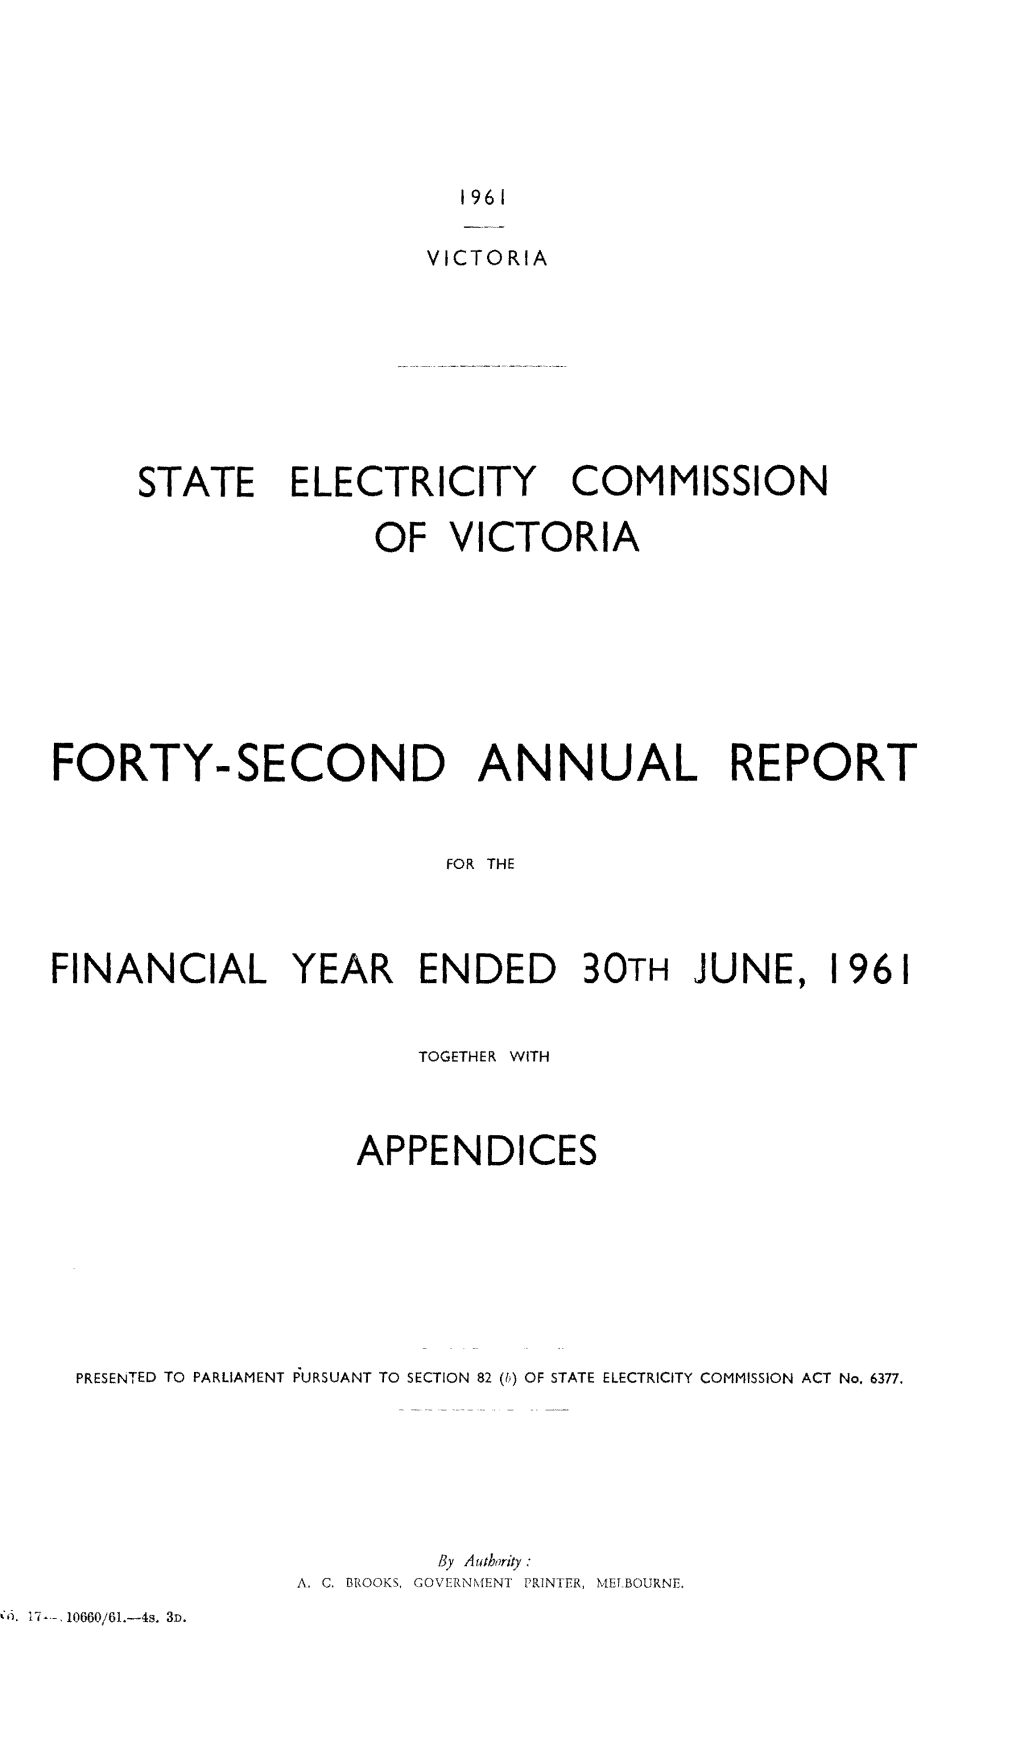 Forty-Second Annual Report